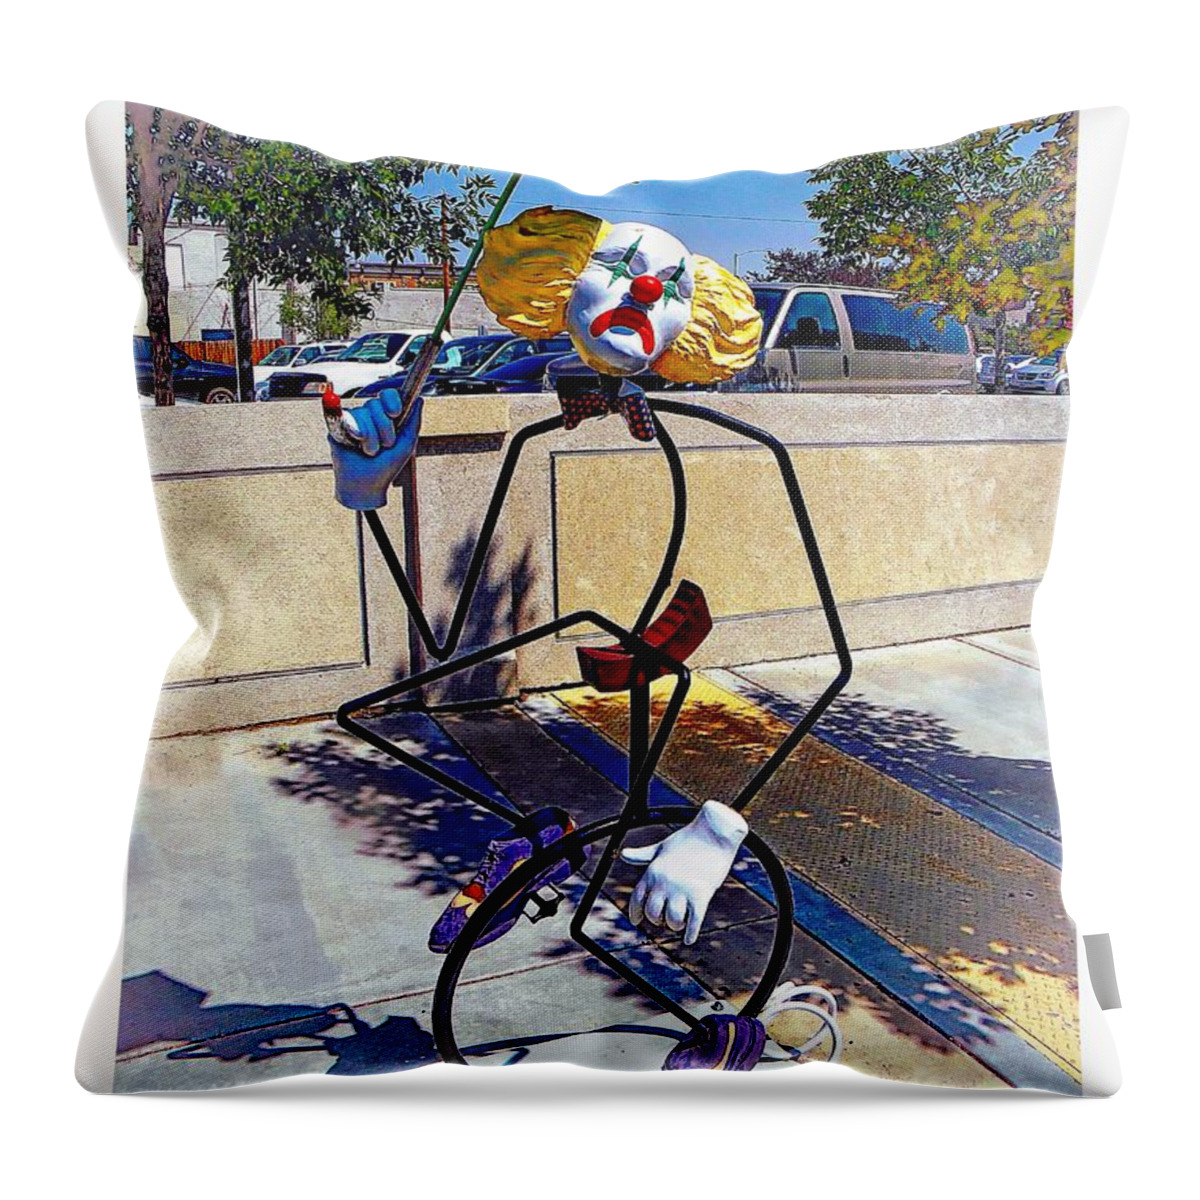 Clown Throw Pillow featuring the photograph Clowning in the street by Michelle Frizzell-Thompson